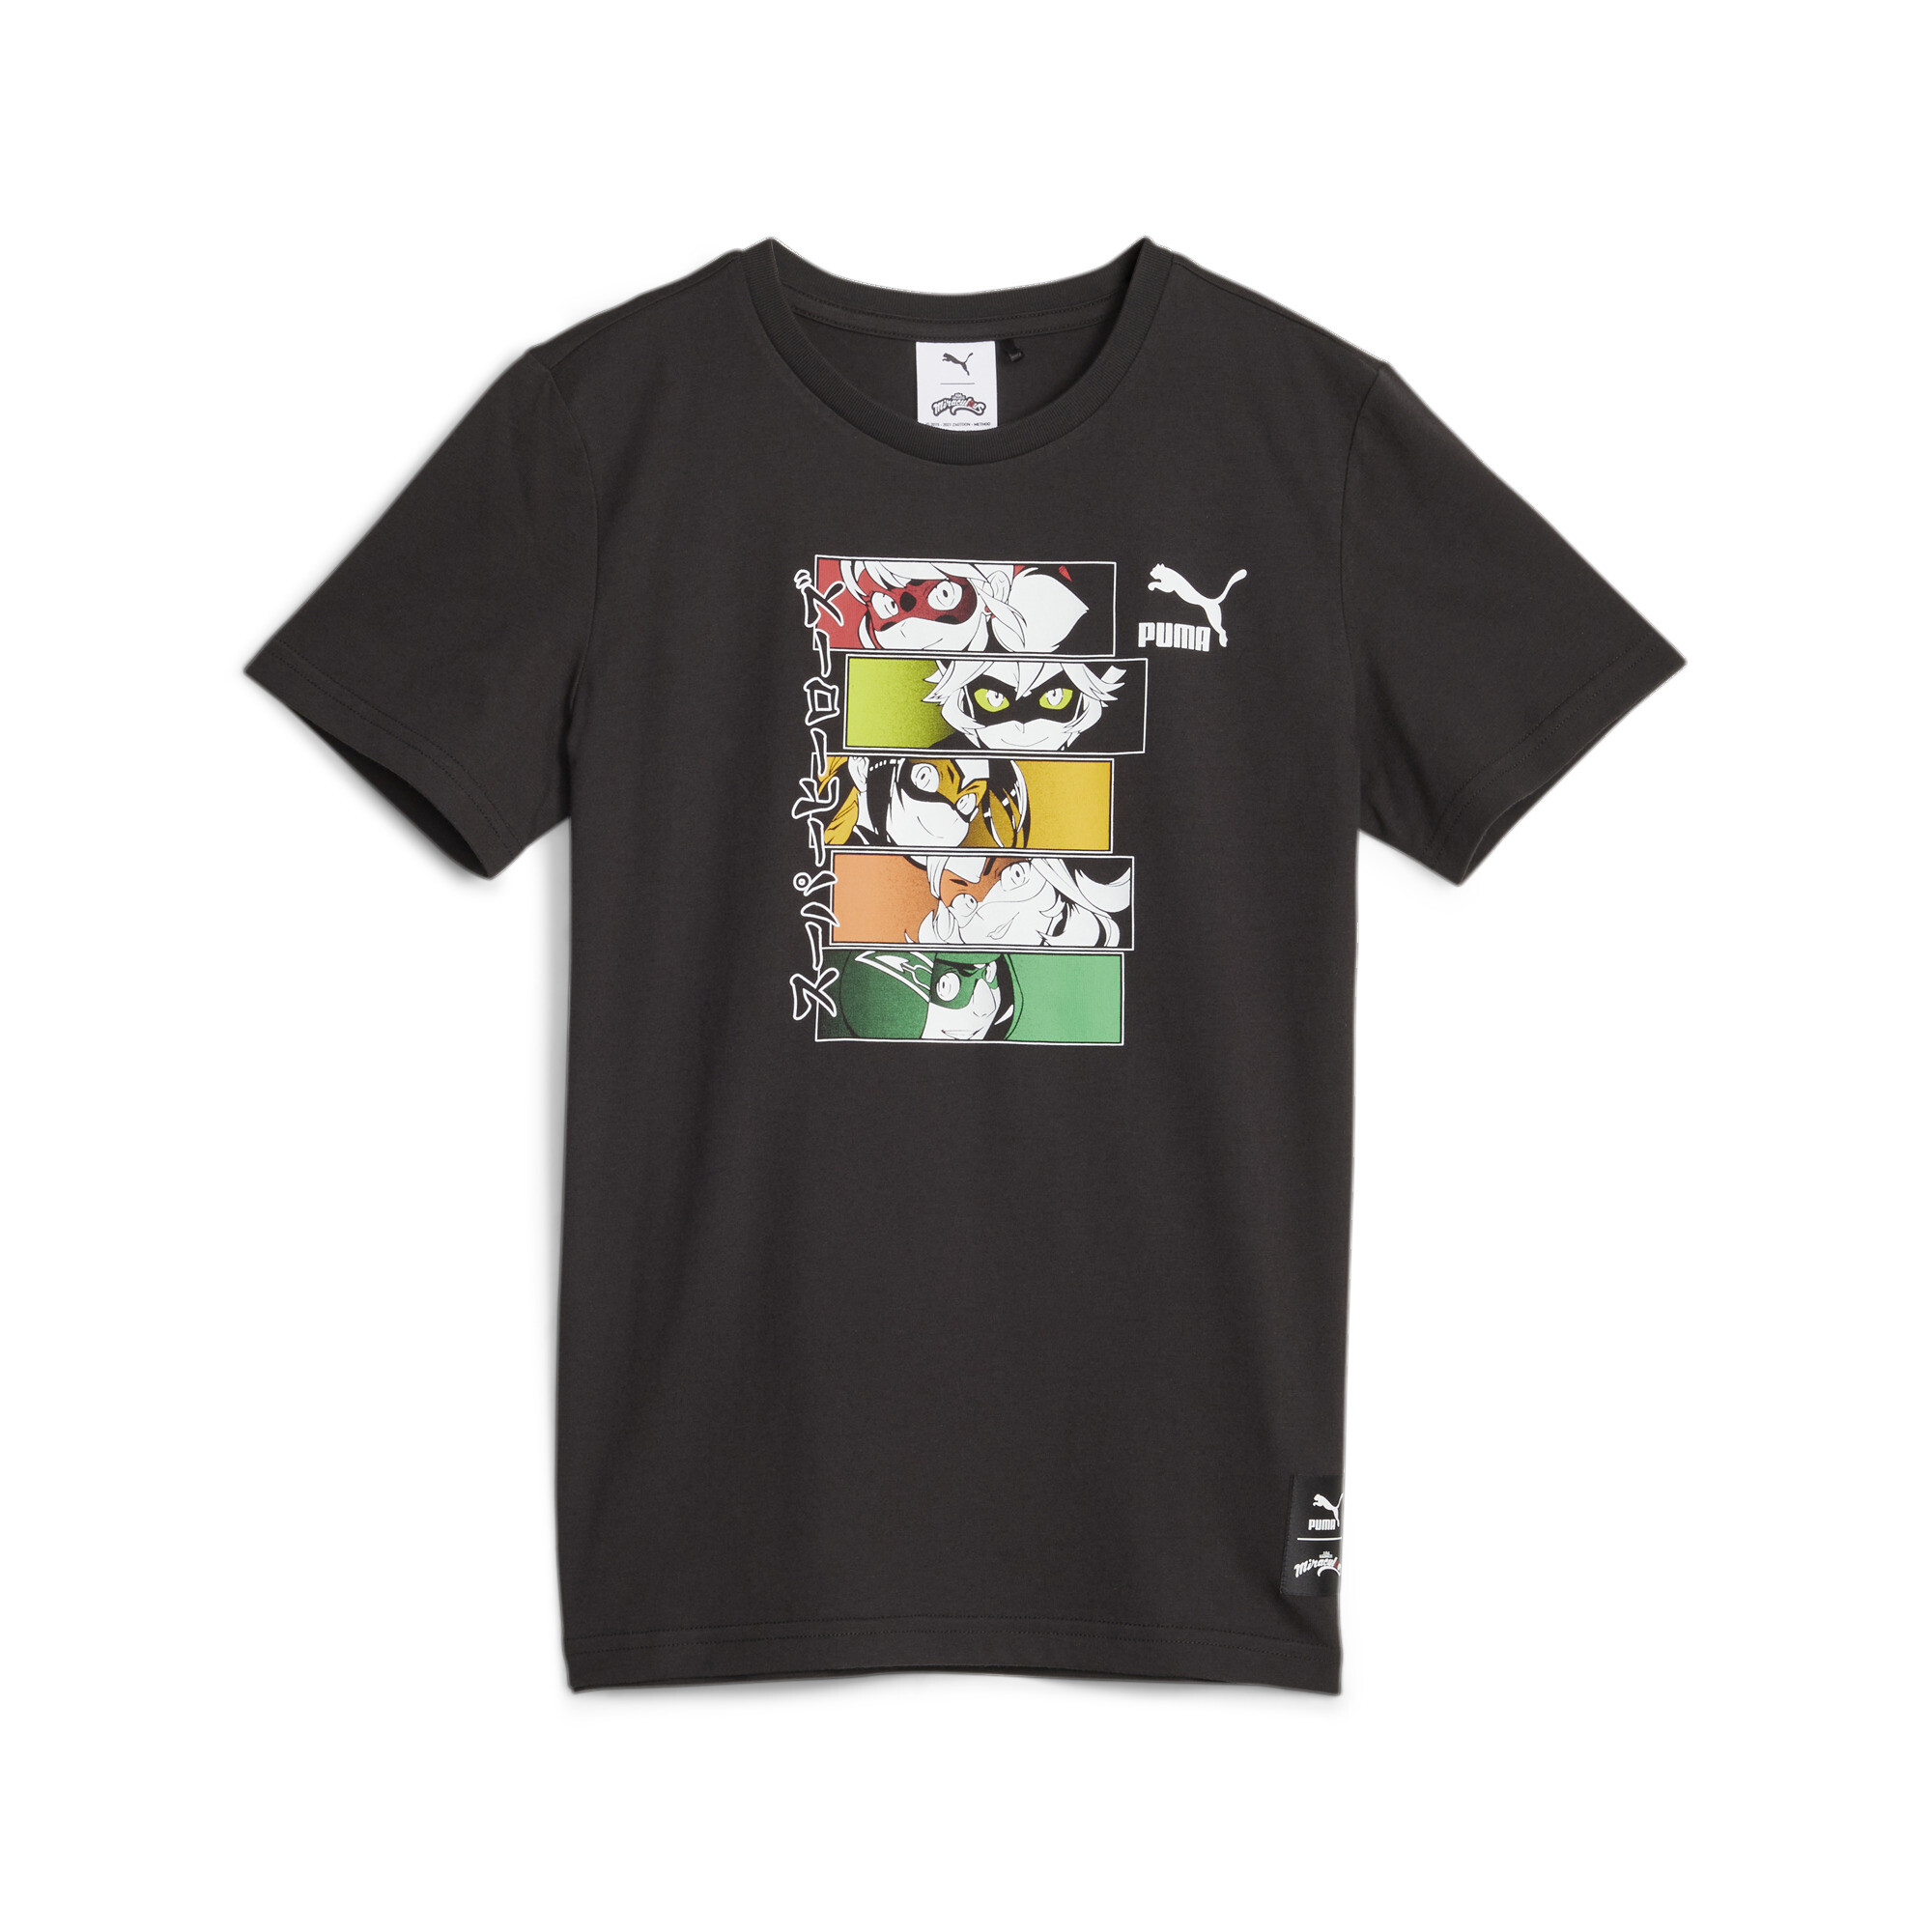 PUMA X MIRACULOUS T-Shirt In Black, Size 7-8 Youth